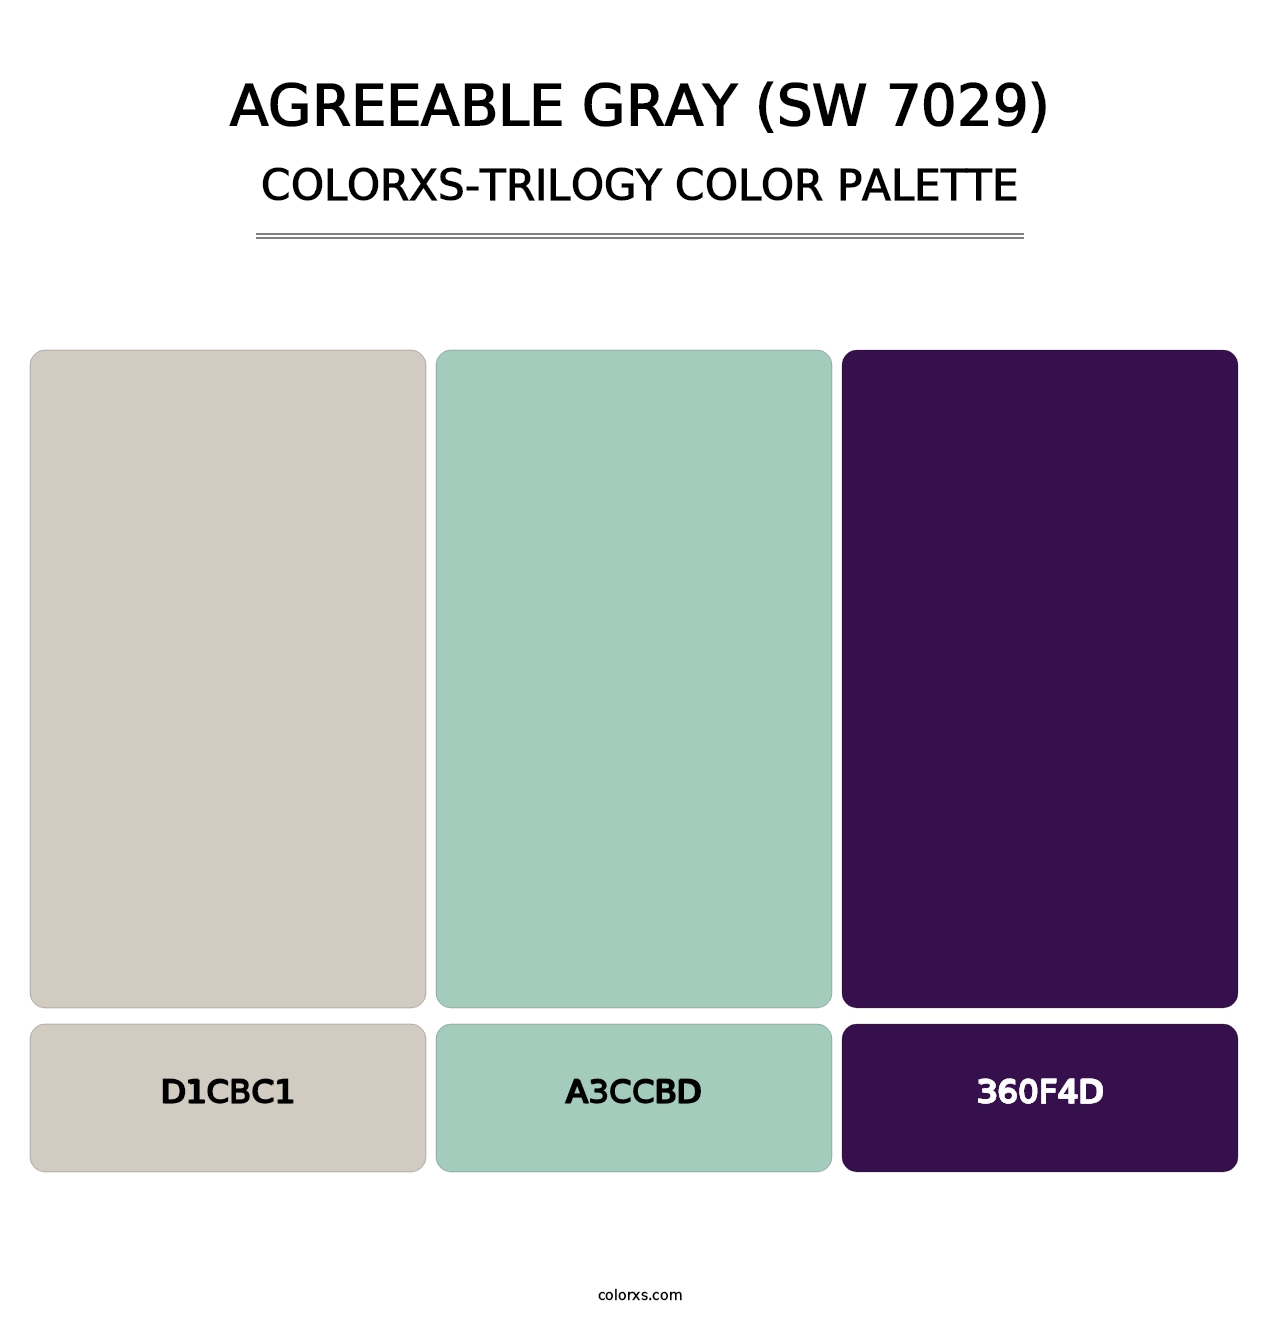 Agreeable Gray (SW 7029) - Colorxs Trilogy Palette